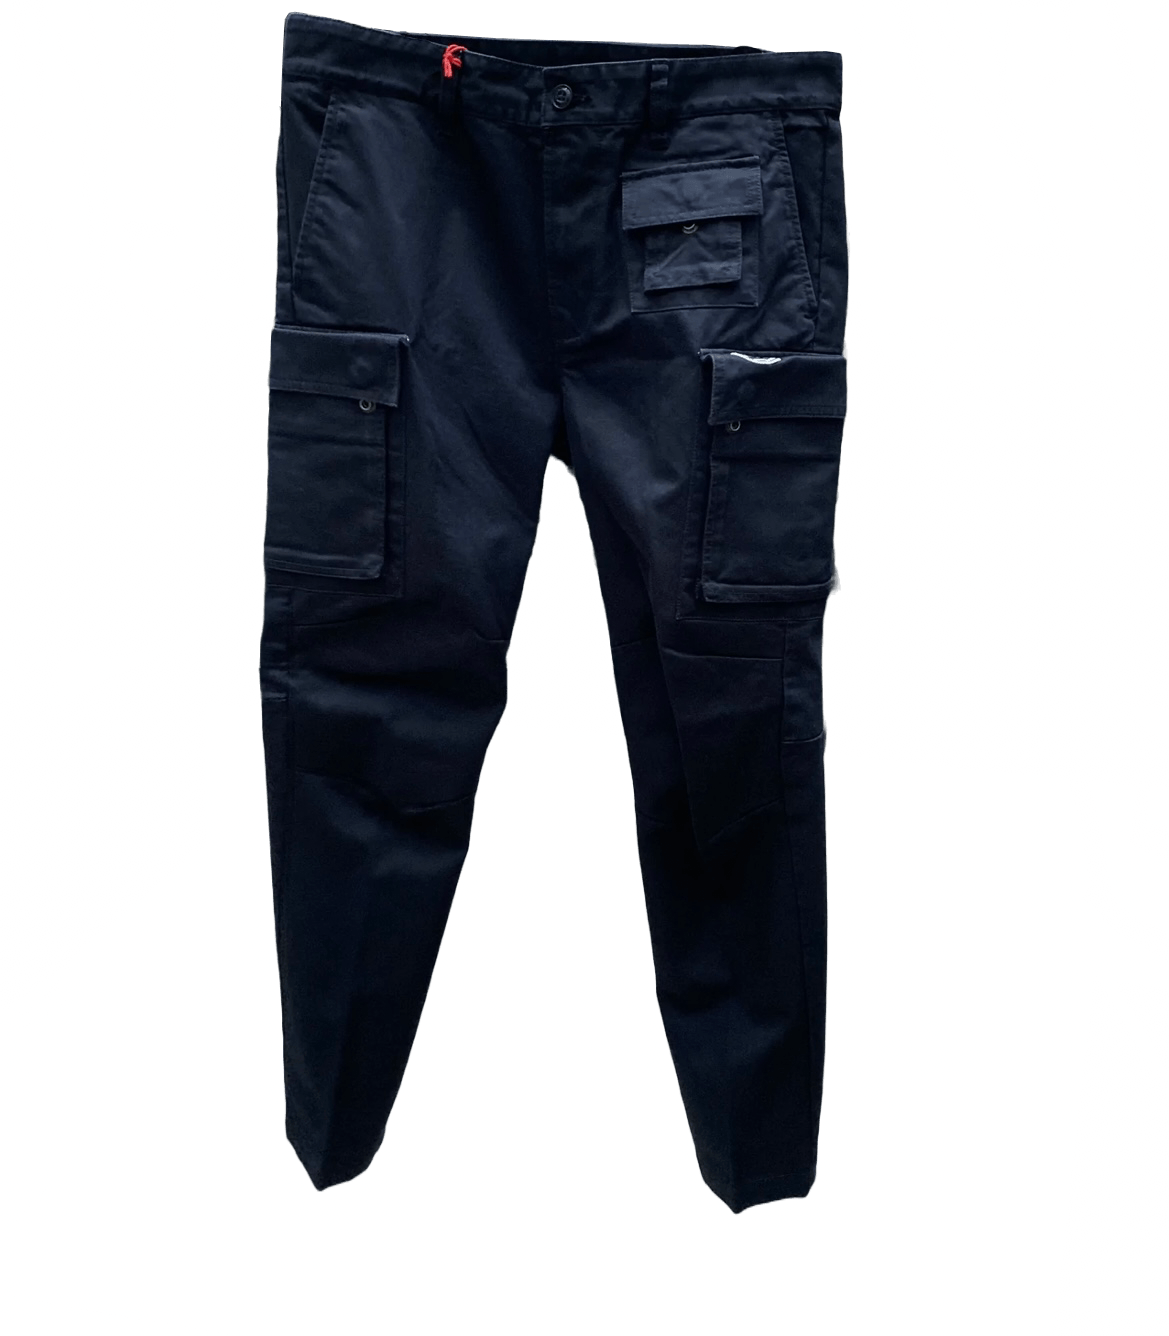 A pair of black DIESEL P-COR-CL pants hanging on a hanger.